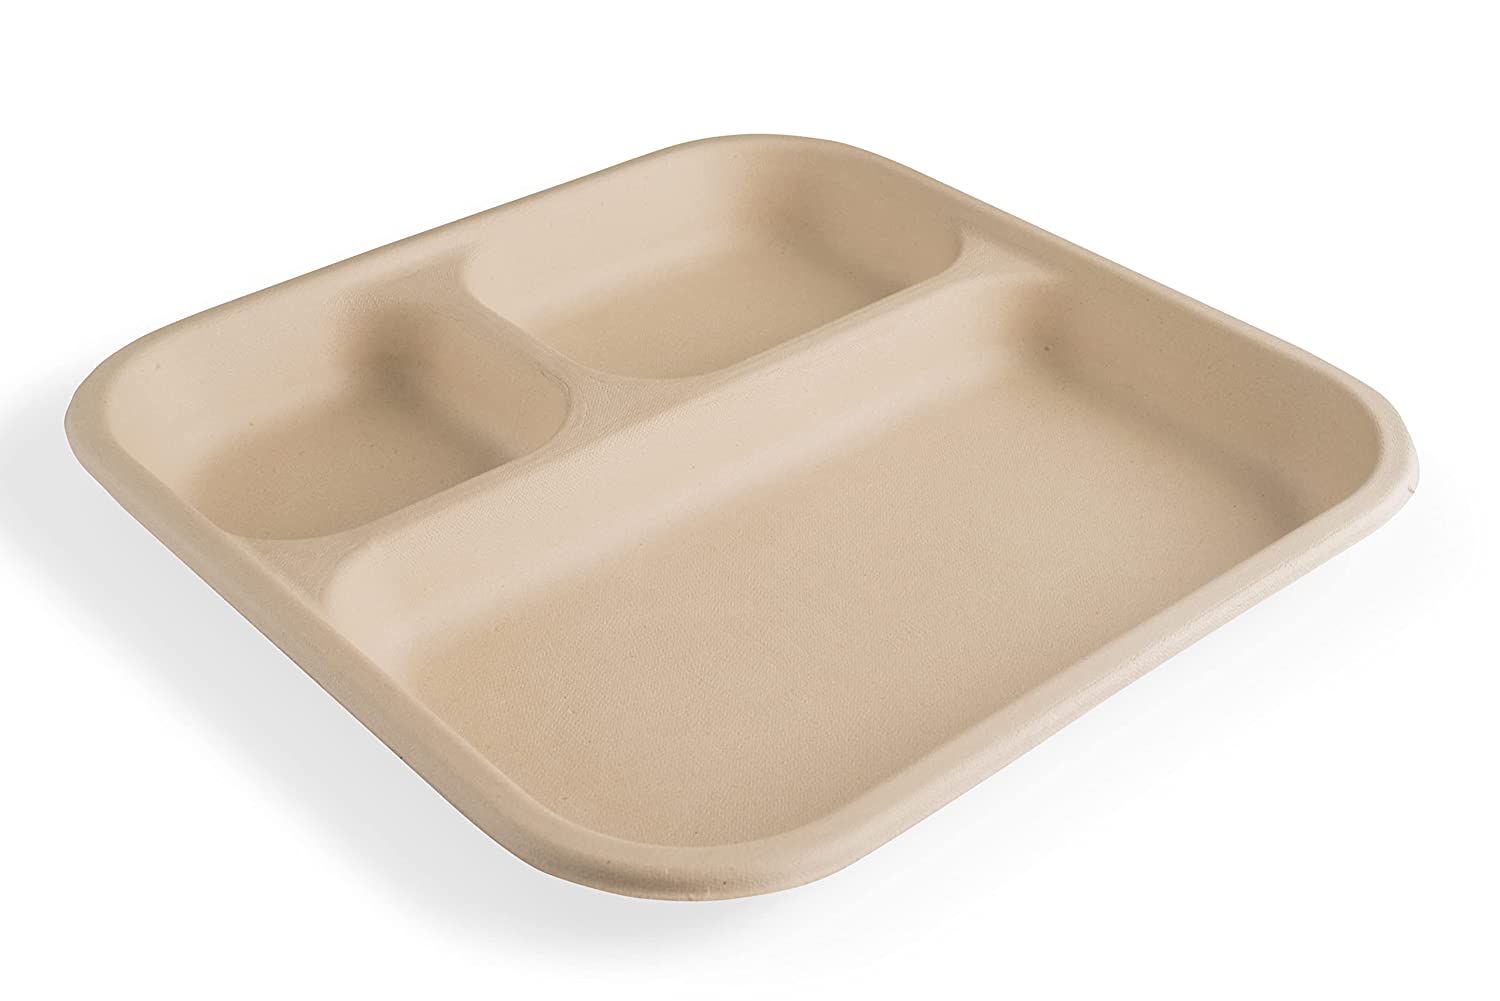 https://www.rudraeco.com/wp-content/uploads/2022/02/Chuk-BioDegradable-Disposable-and-Eco-Friendly-Meal-Tray-3-Compartment-%E2%80%93-Set-of-25-2.jpg